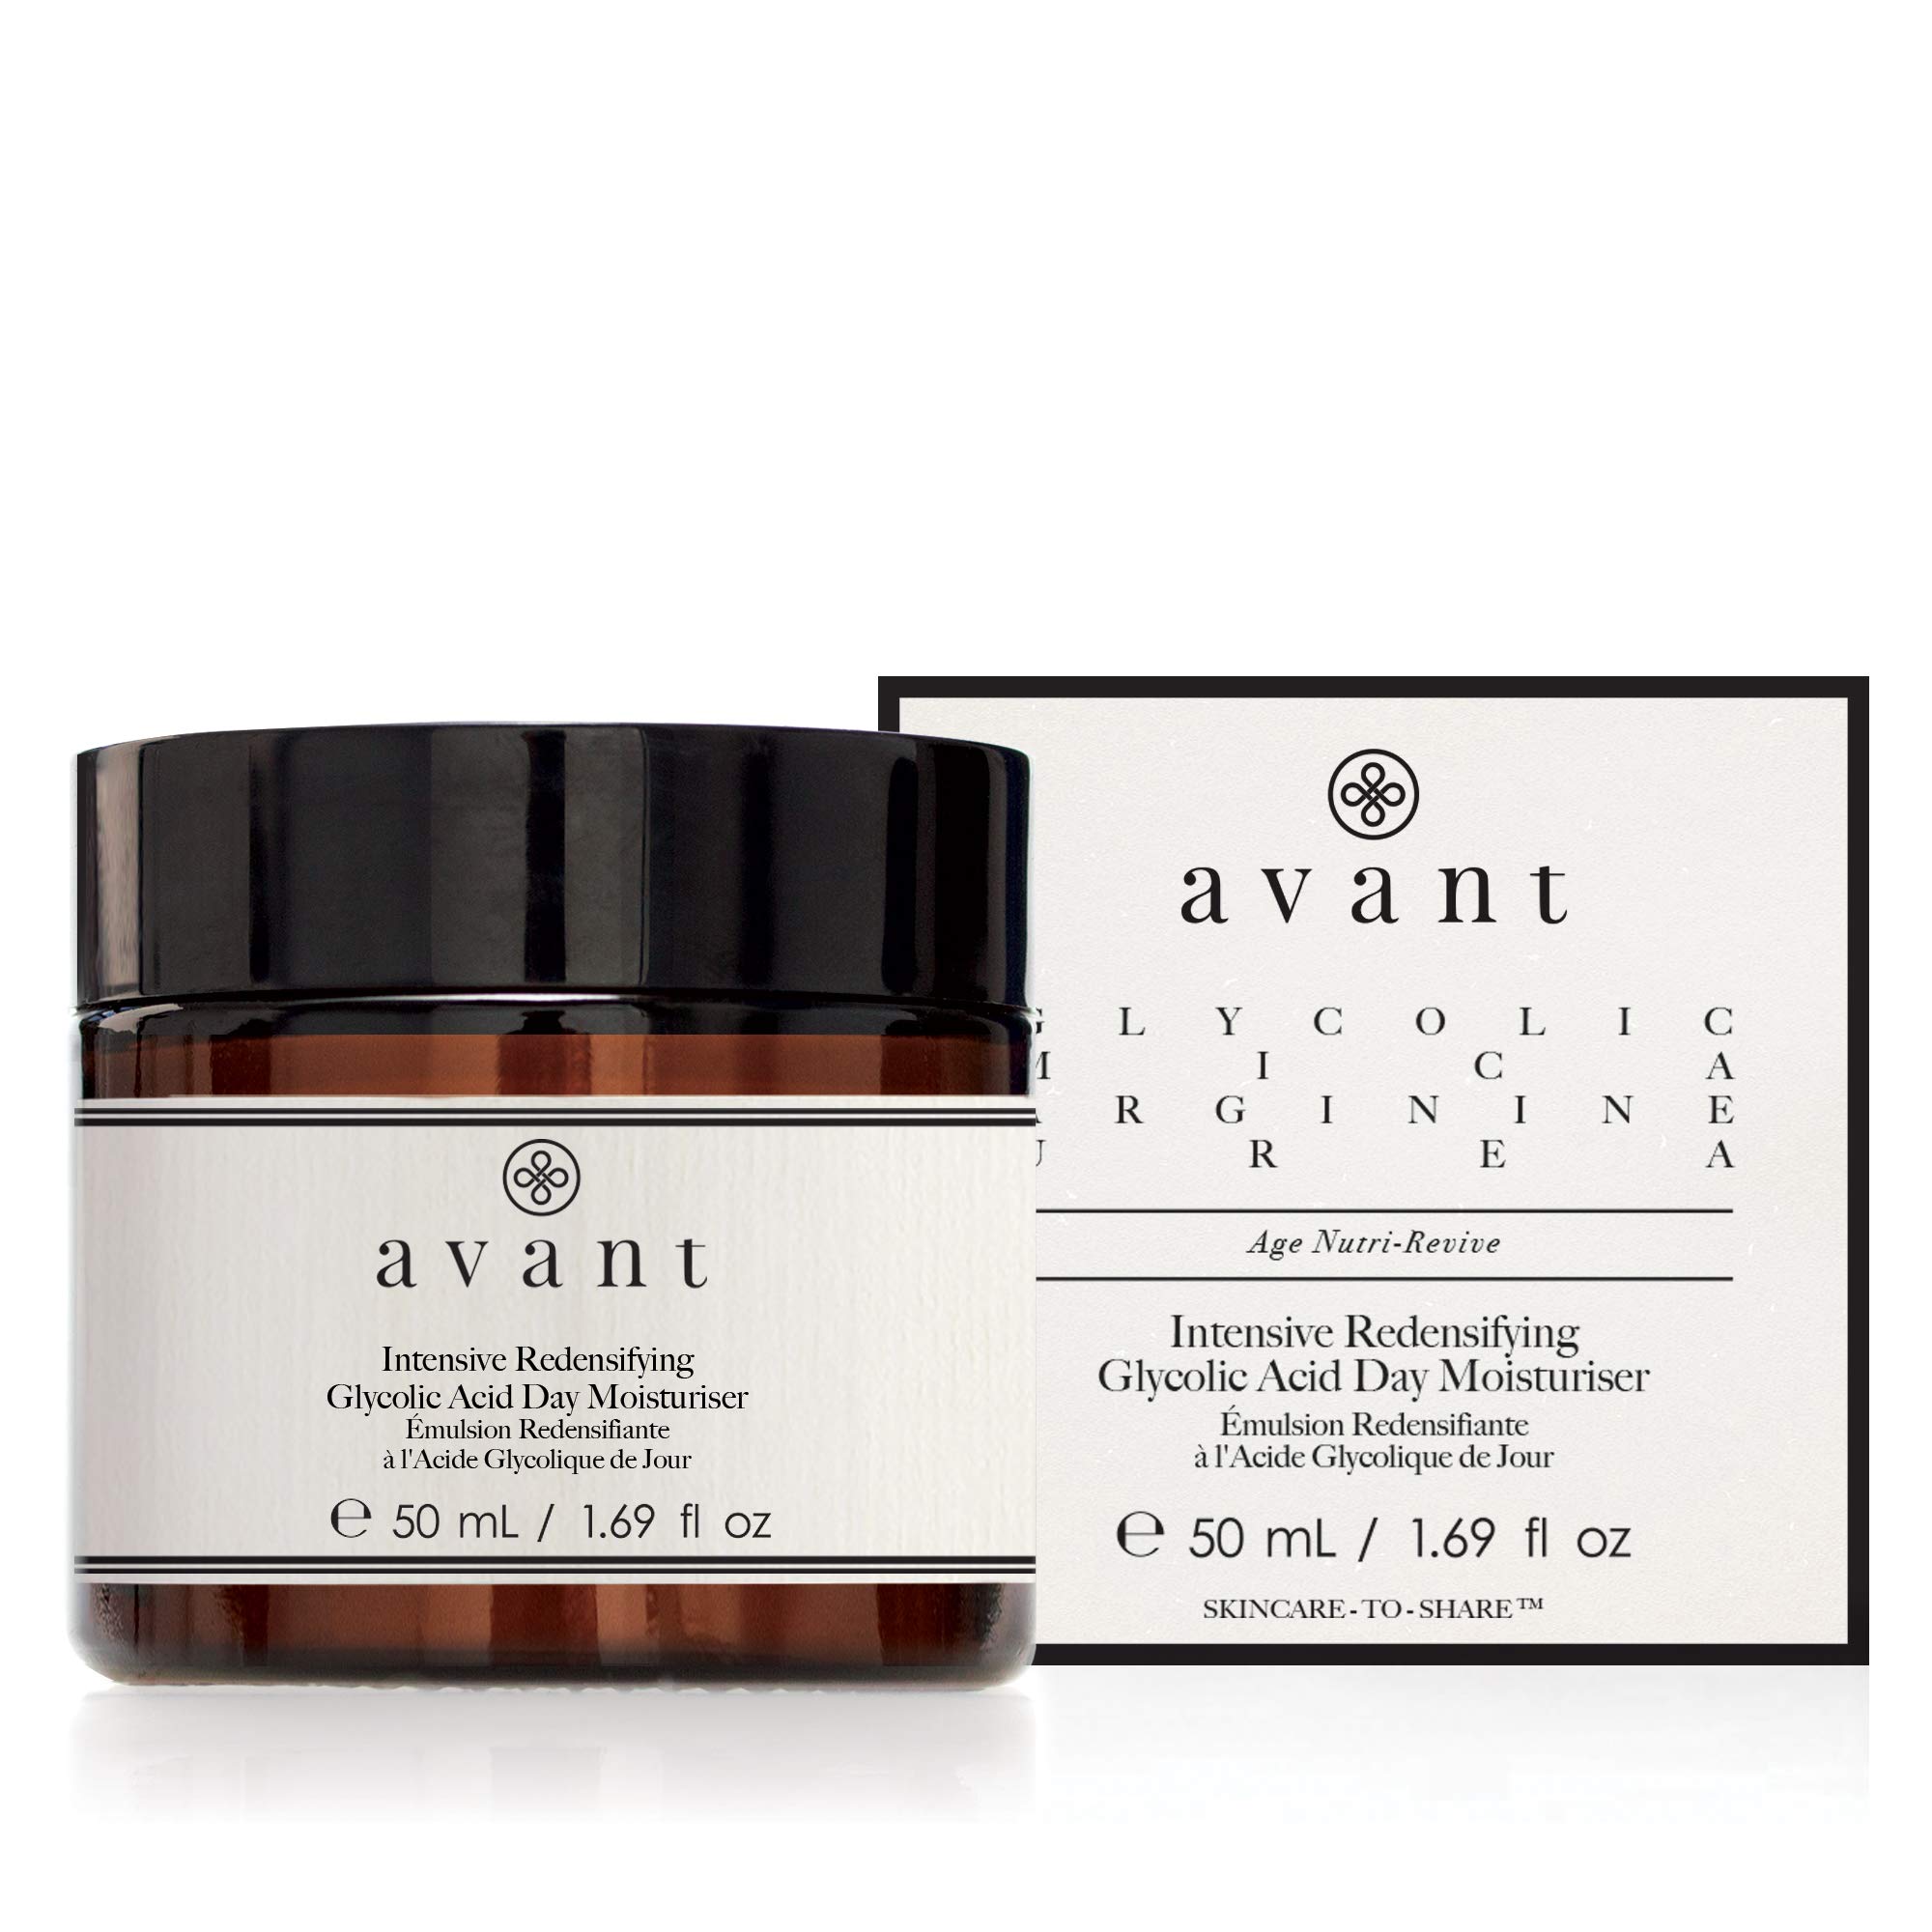 Avant Feuchtigkeitsspendende Glycolic Tagescreme Intensive Redensifying | 1x50ml